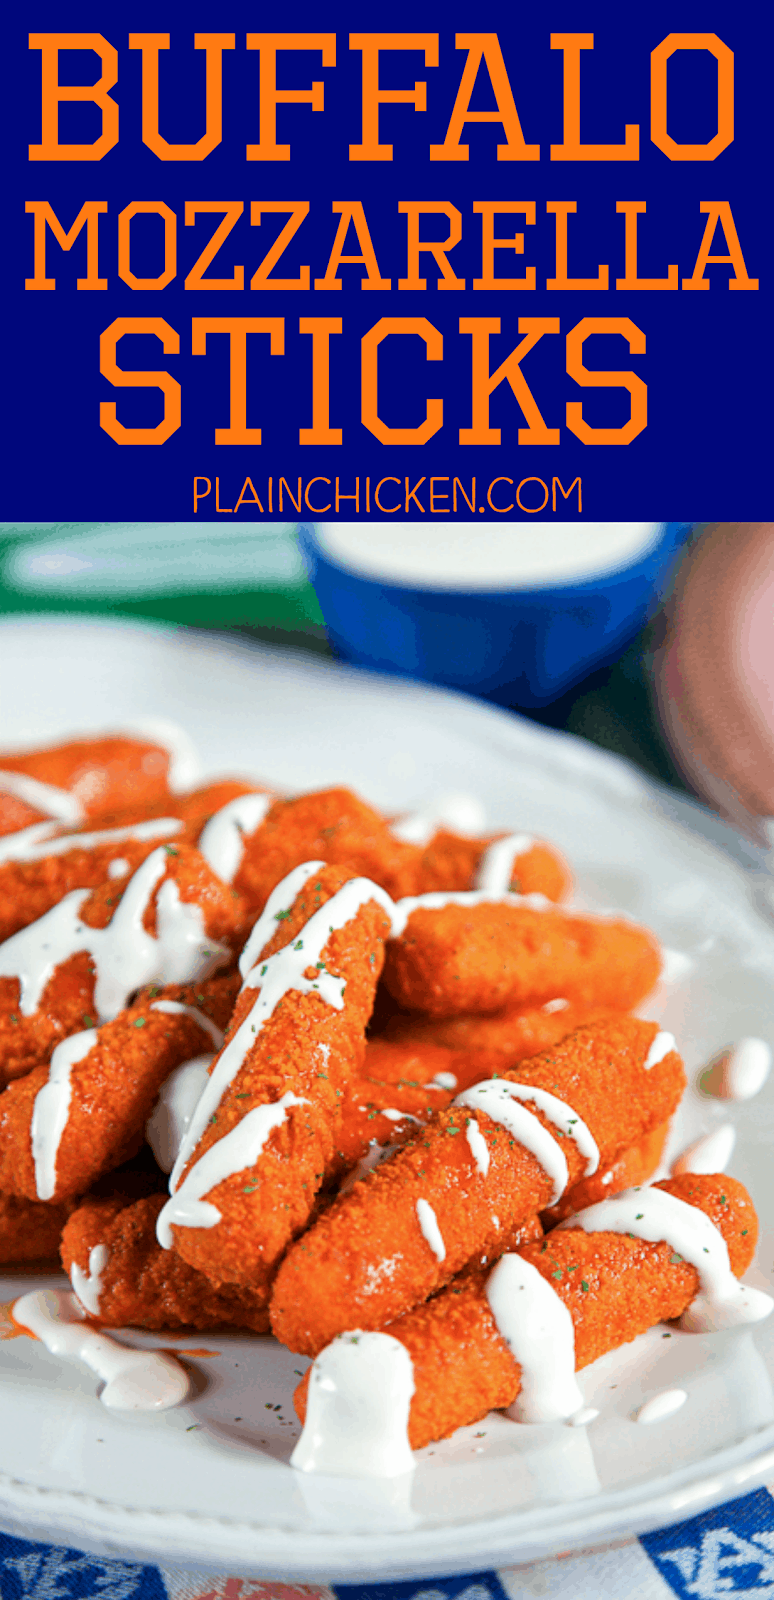 Buffalo Mozzarella Sticks - two favorites combined into one! SO good! Only 2 ingredients and ready in 15 minutes. Great for parties and tailgating. 